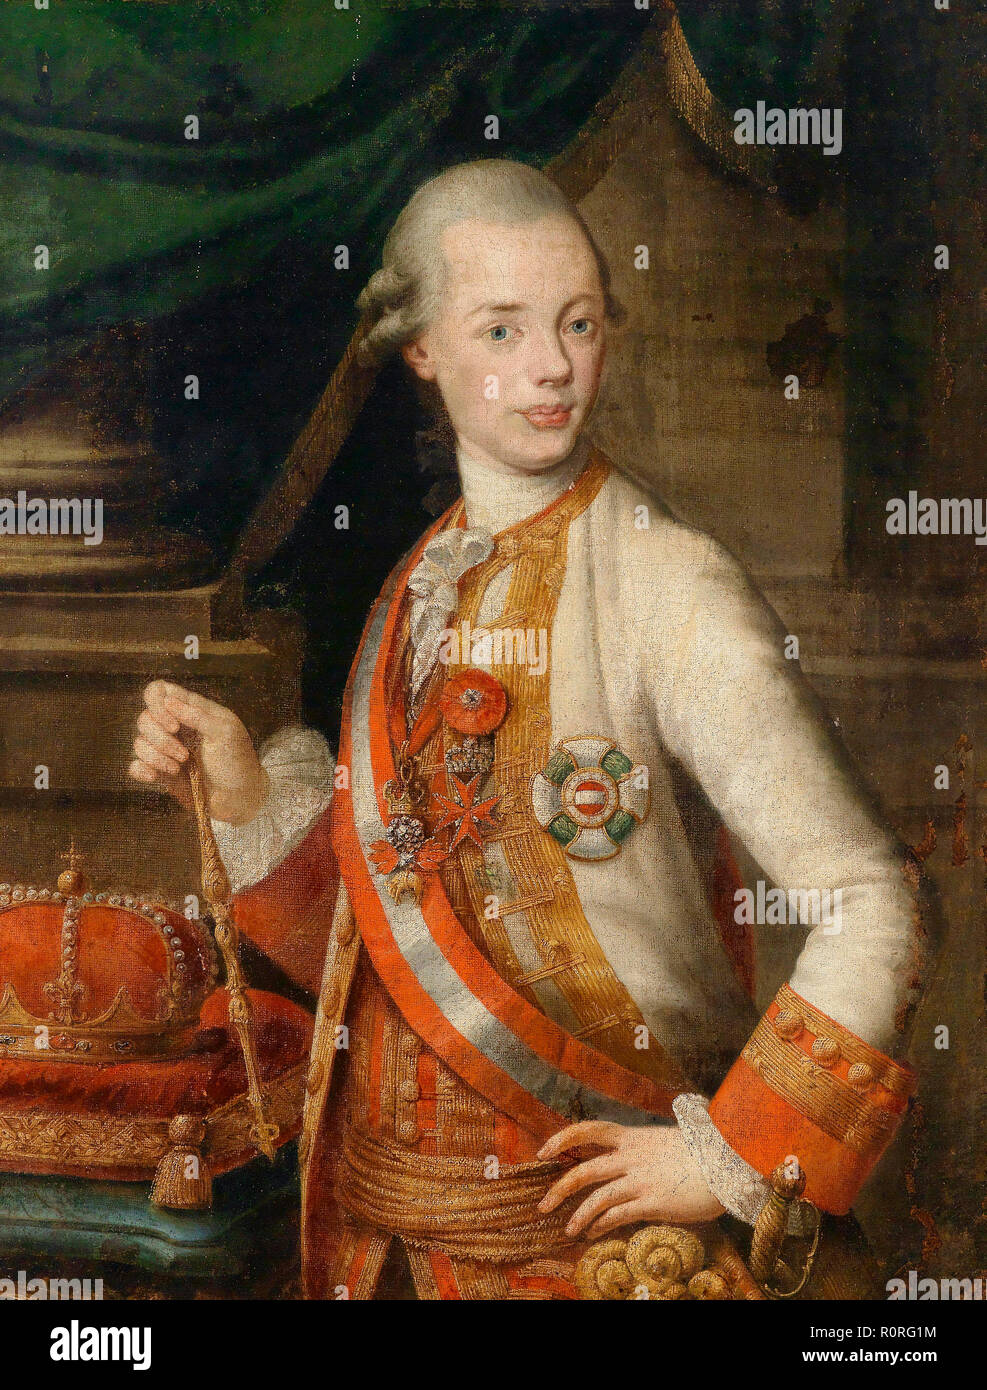 Portrait of the later emperor Leopold II as Grand Duke of Tuscany, after 1765 Stock Photo